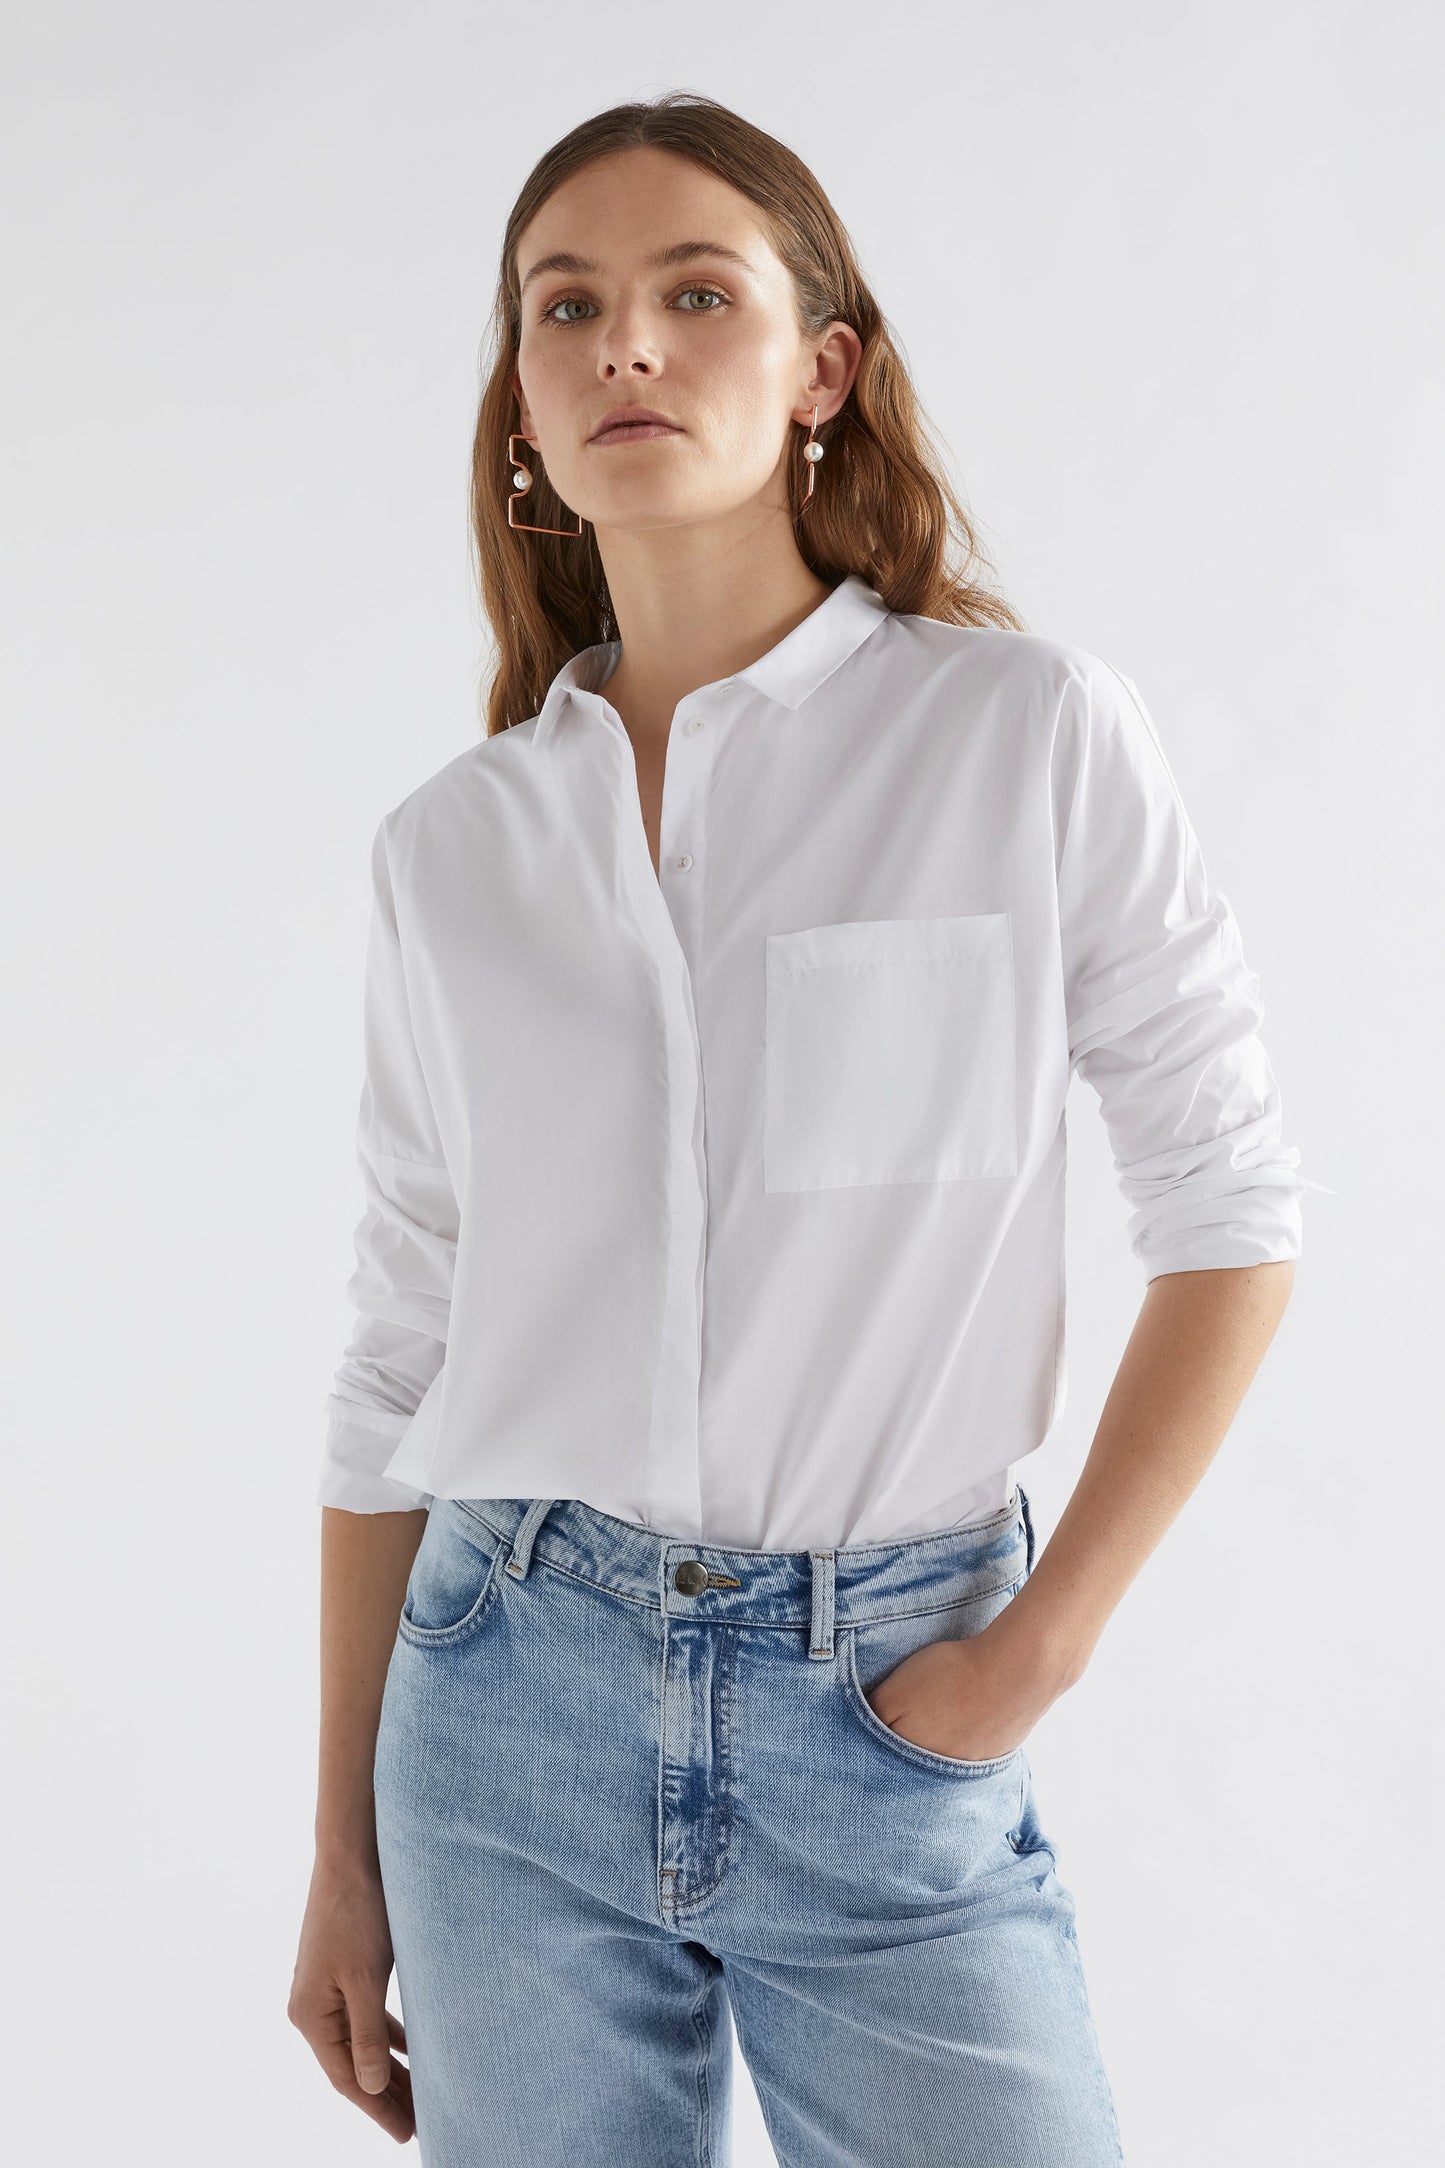 Rinna Organic Cotton White Everyday Shirt with Front Pocket Model Front | WHITE